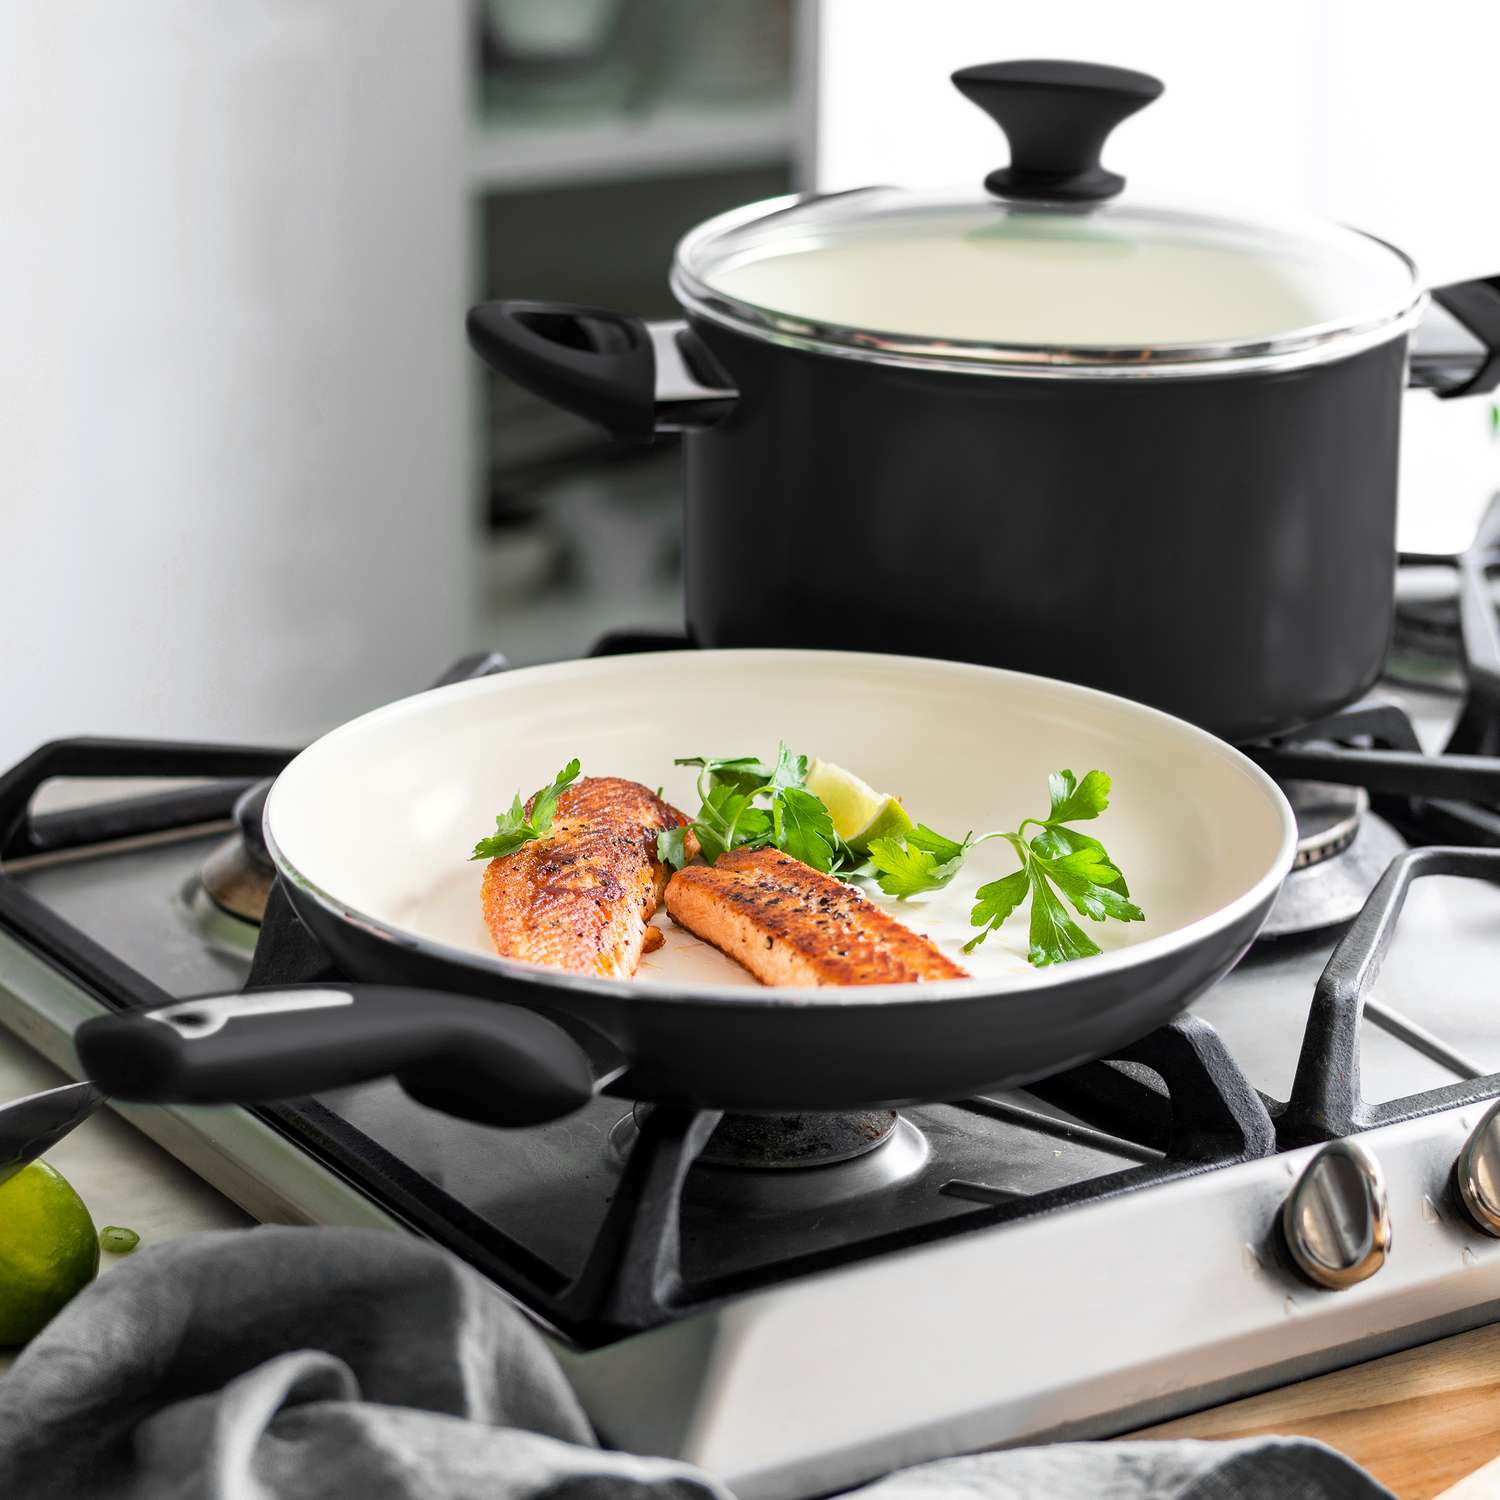 Ace Cook Premium Quality Nonstick Healthy Ceramic Coating Frying